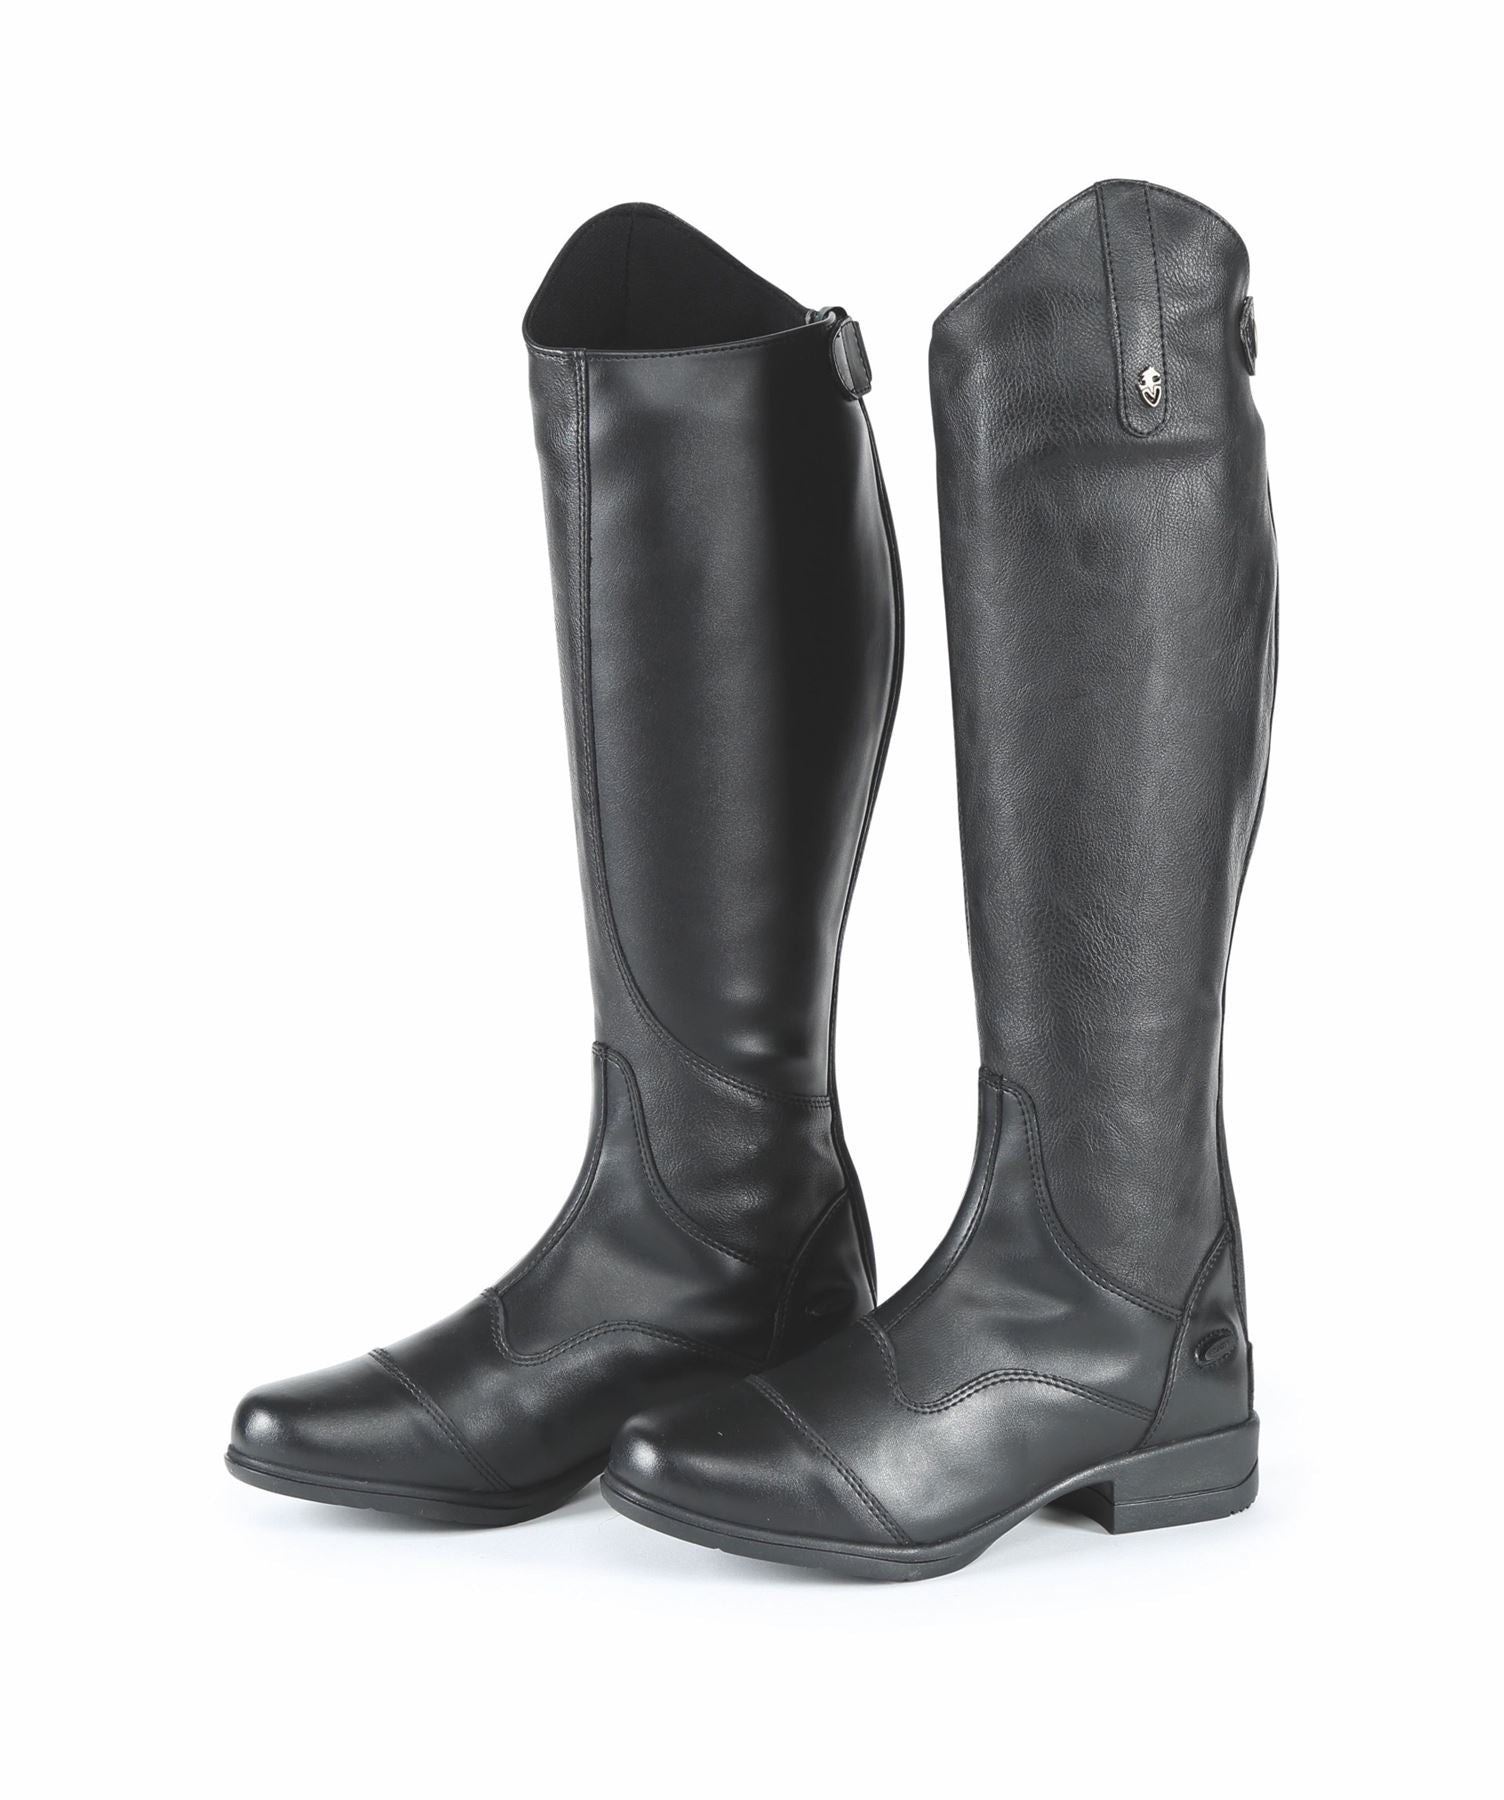 Shires Moretta Marcia Riding Boots - Childs - Just Horse Riders